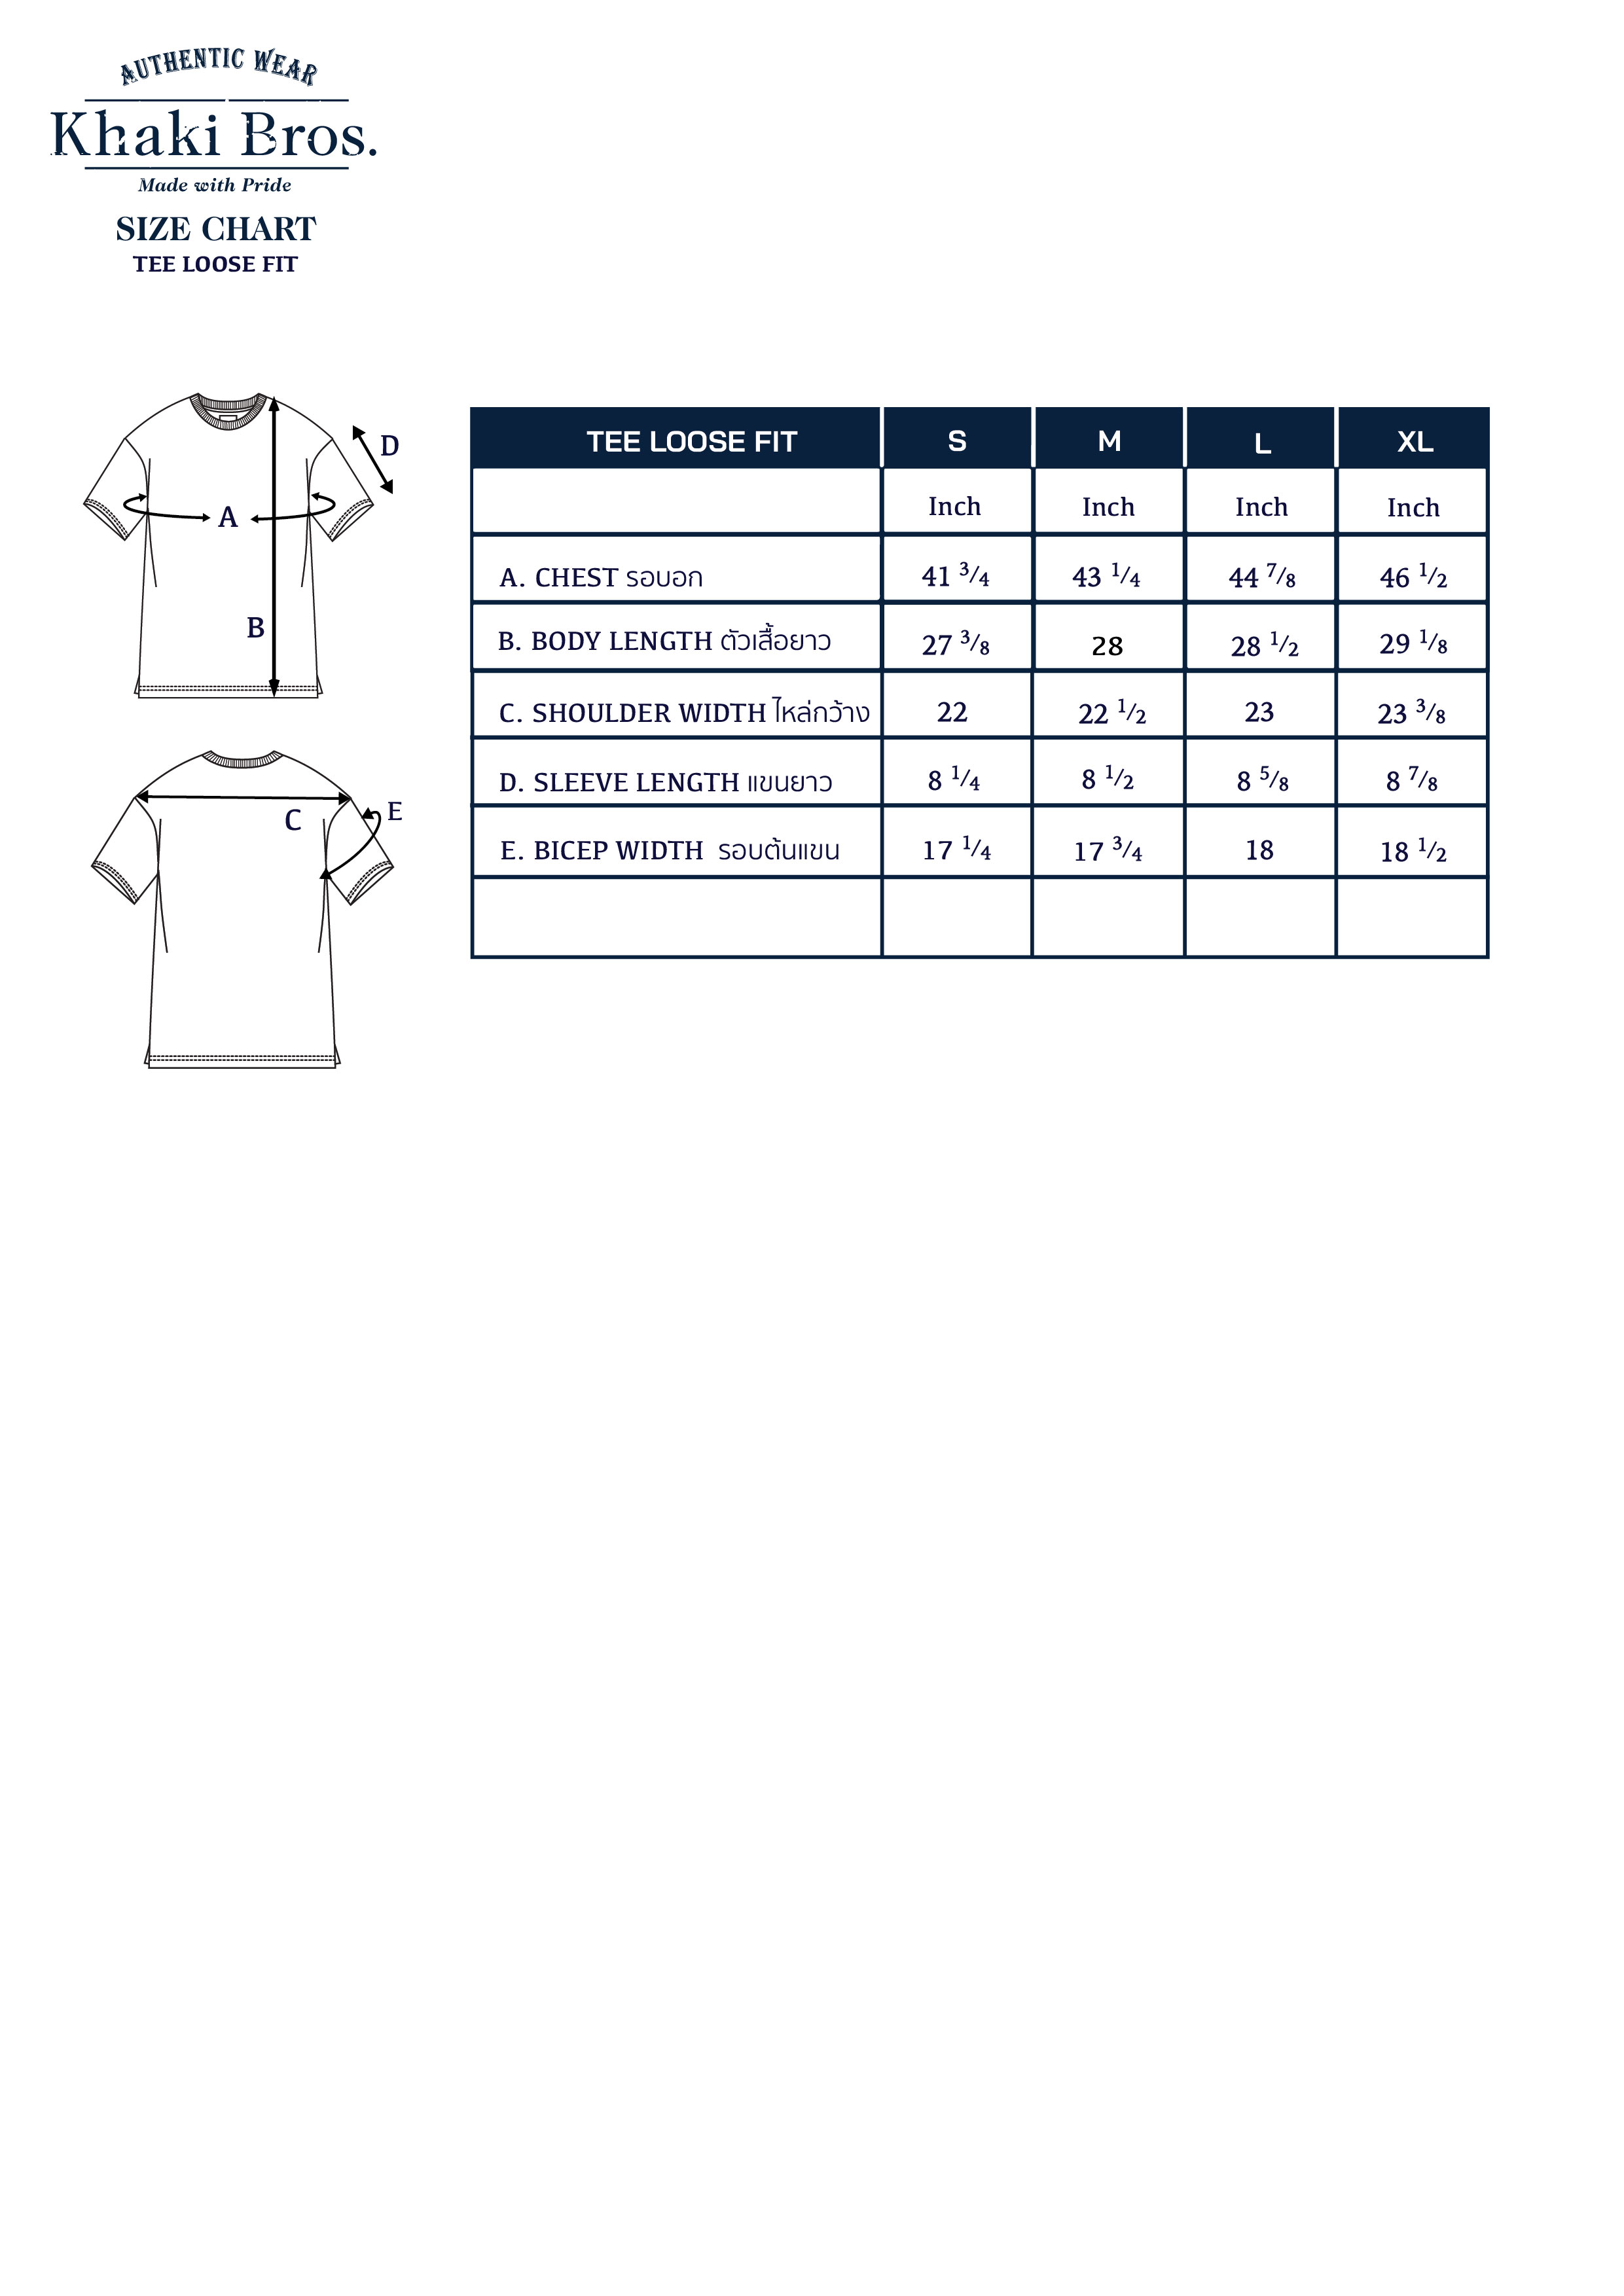 Tee_Loose_Fit_Size_Chart_2022_Update-15_3